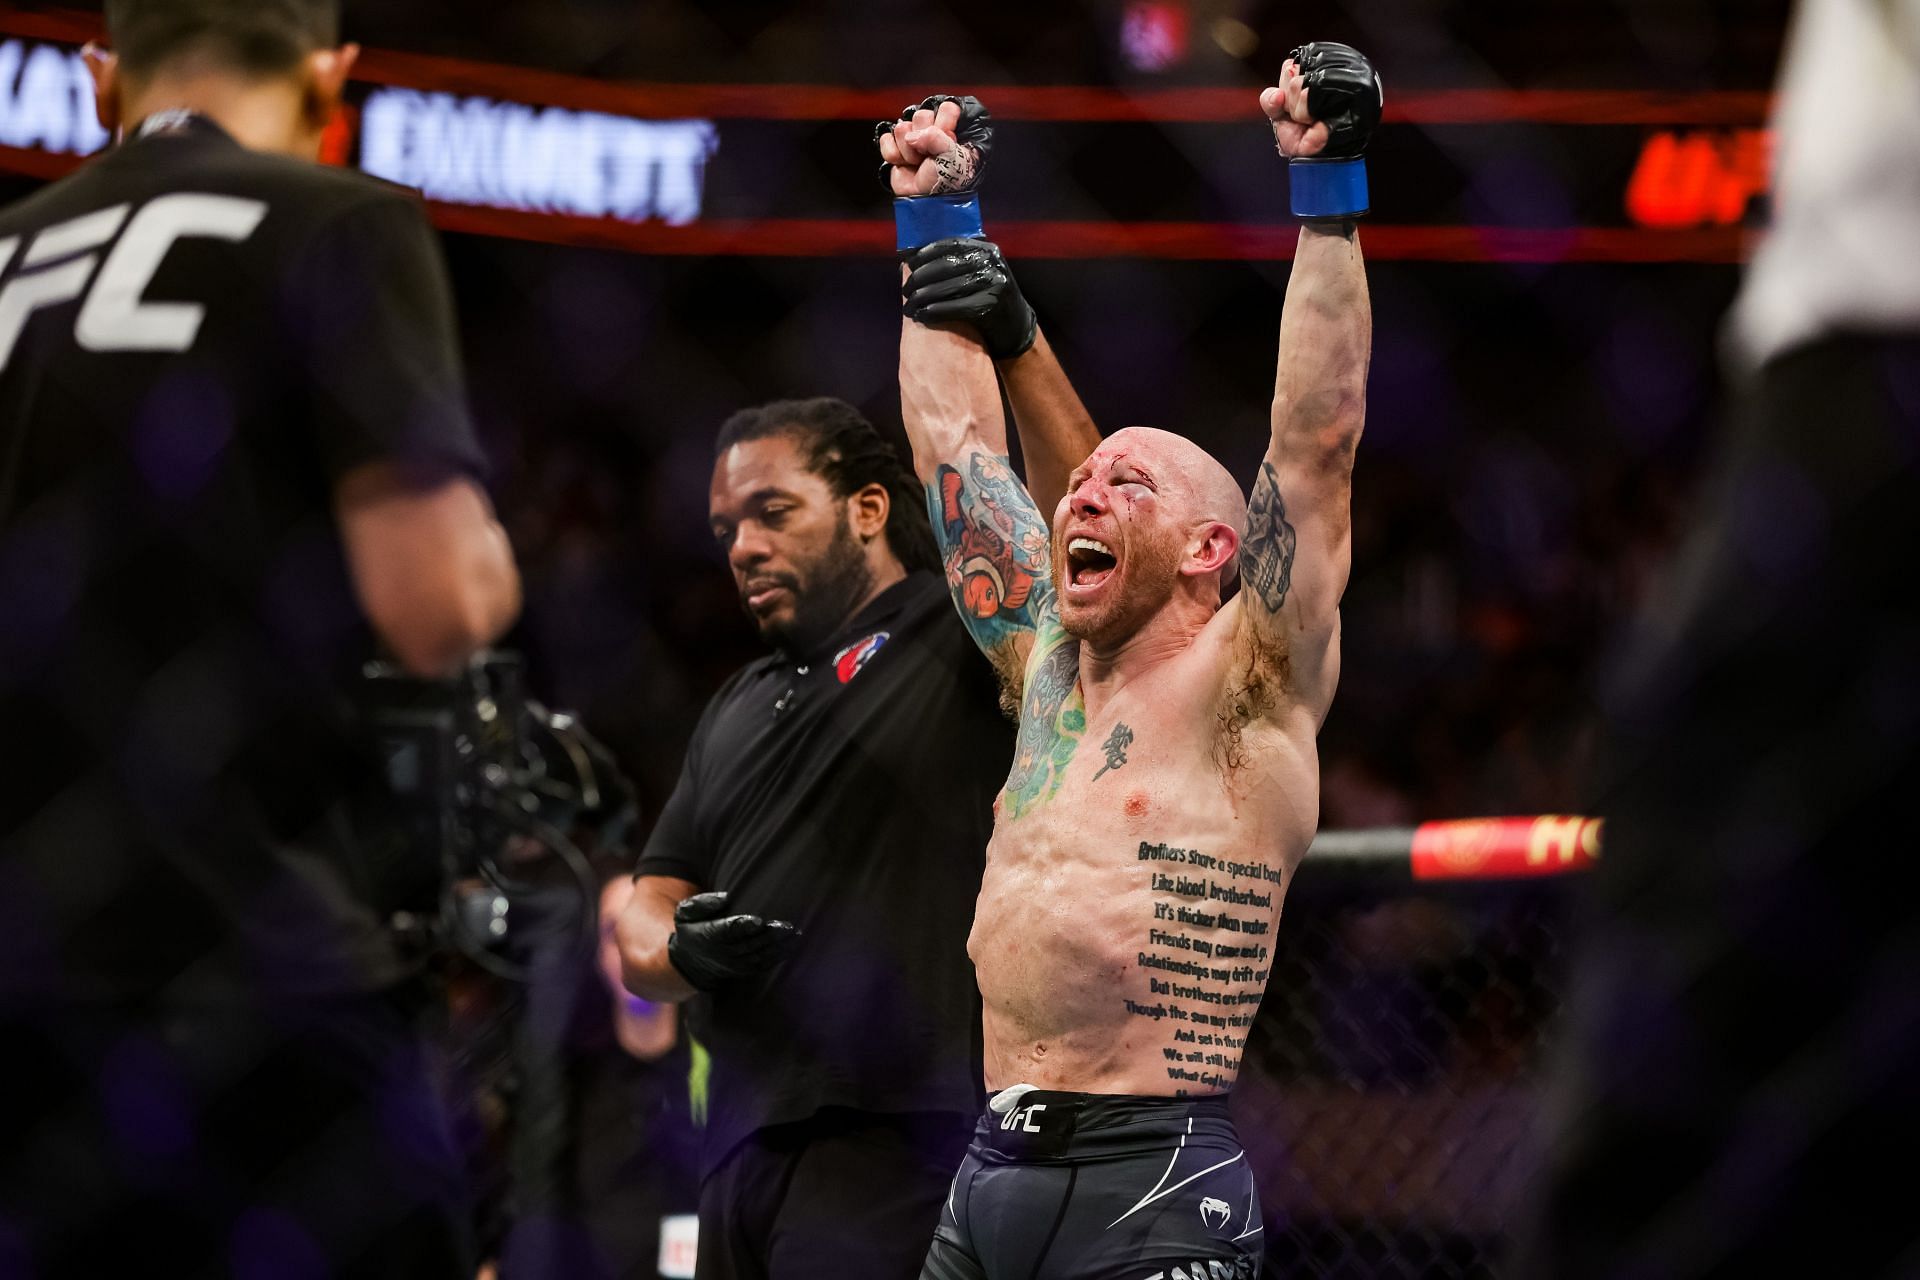 Josh Emmett has his own claim to a UFC featherweight title shot right now